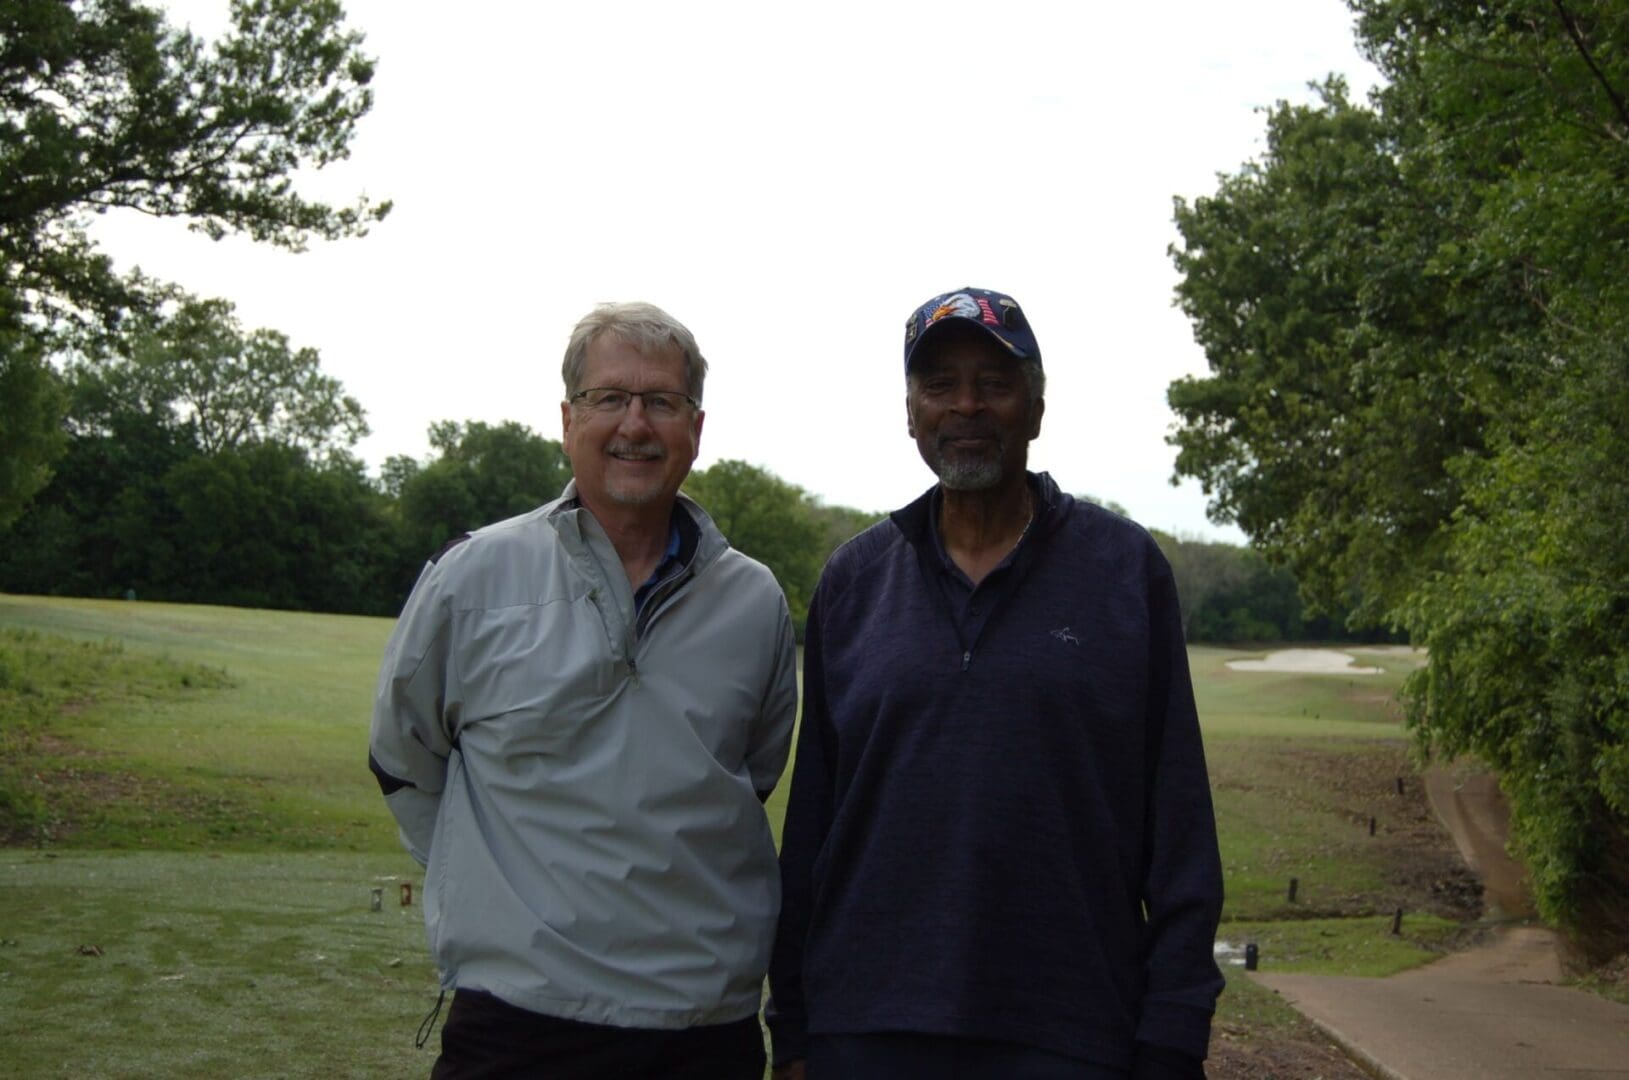 Two men standing next to each other on a golf course.